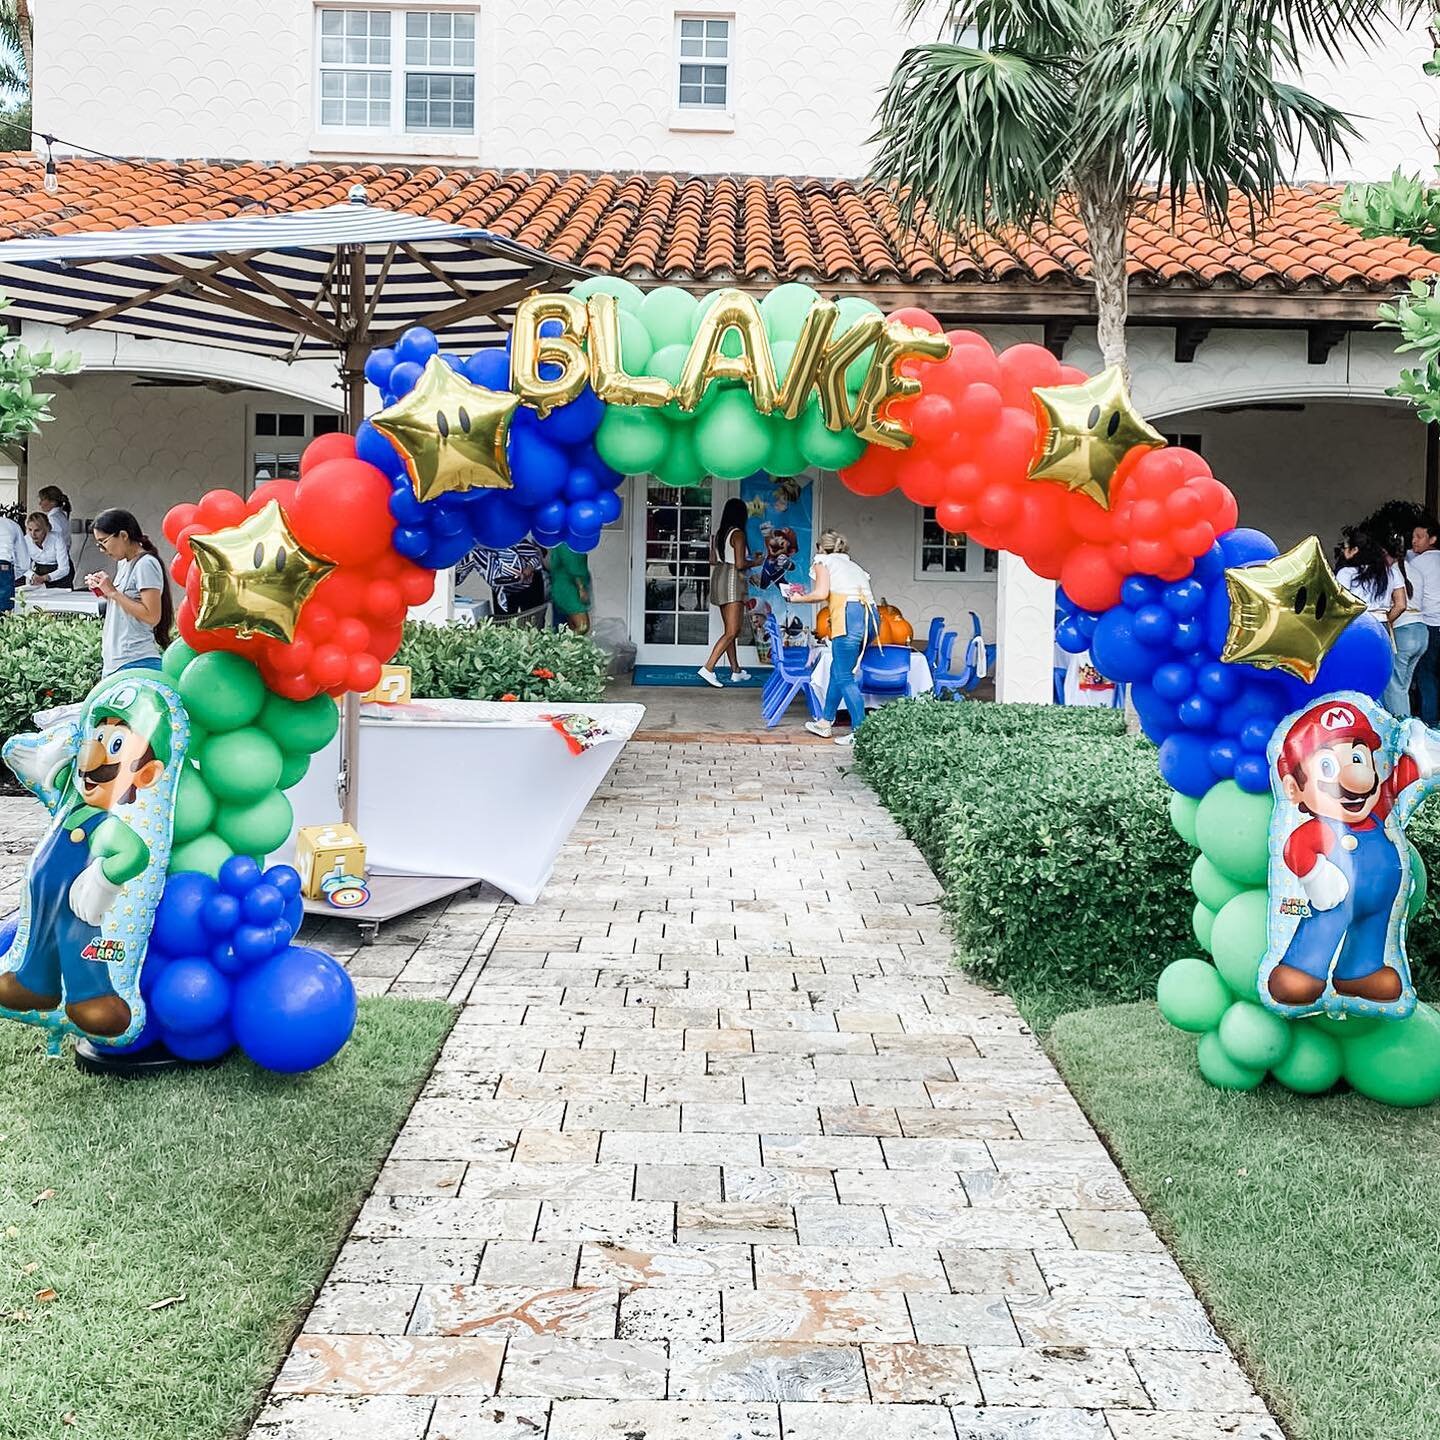 Attention all Mario fans! 🎮🍄🎈 Check out this awesome Mario balloon decoration we made for a birthday party! 🎂🎉 The colorful balloons feature Mario, Luigi, and all their friends from the Mushroom Kingdom, and the design is perfect for any gamer-t